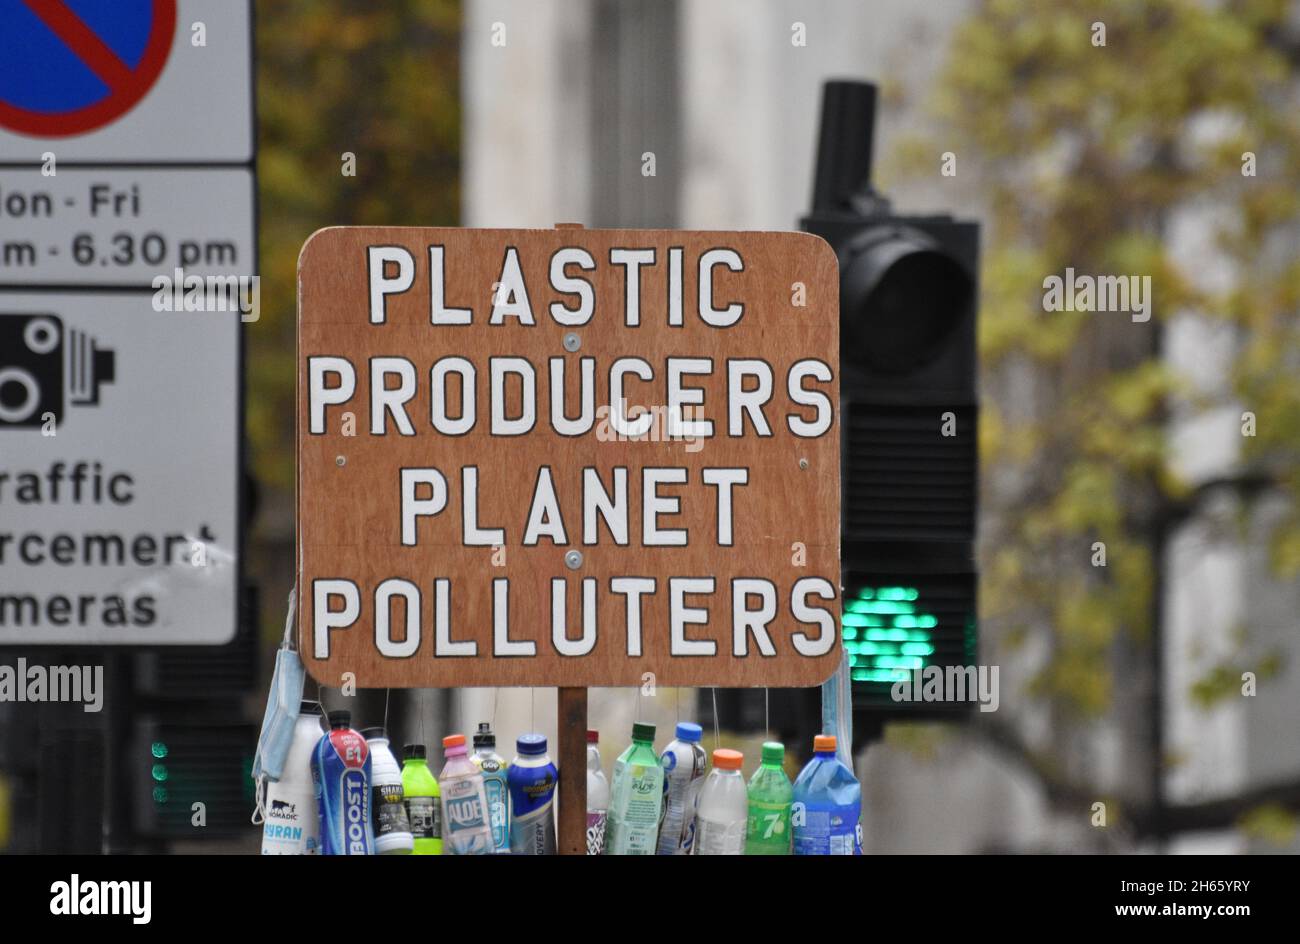 A protest sign the reads “Plastic Producers Planet Polluters” being held by a protester against single use plastic and it’s environmental impact Stock Photo